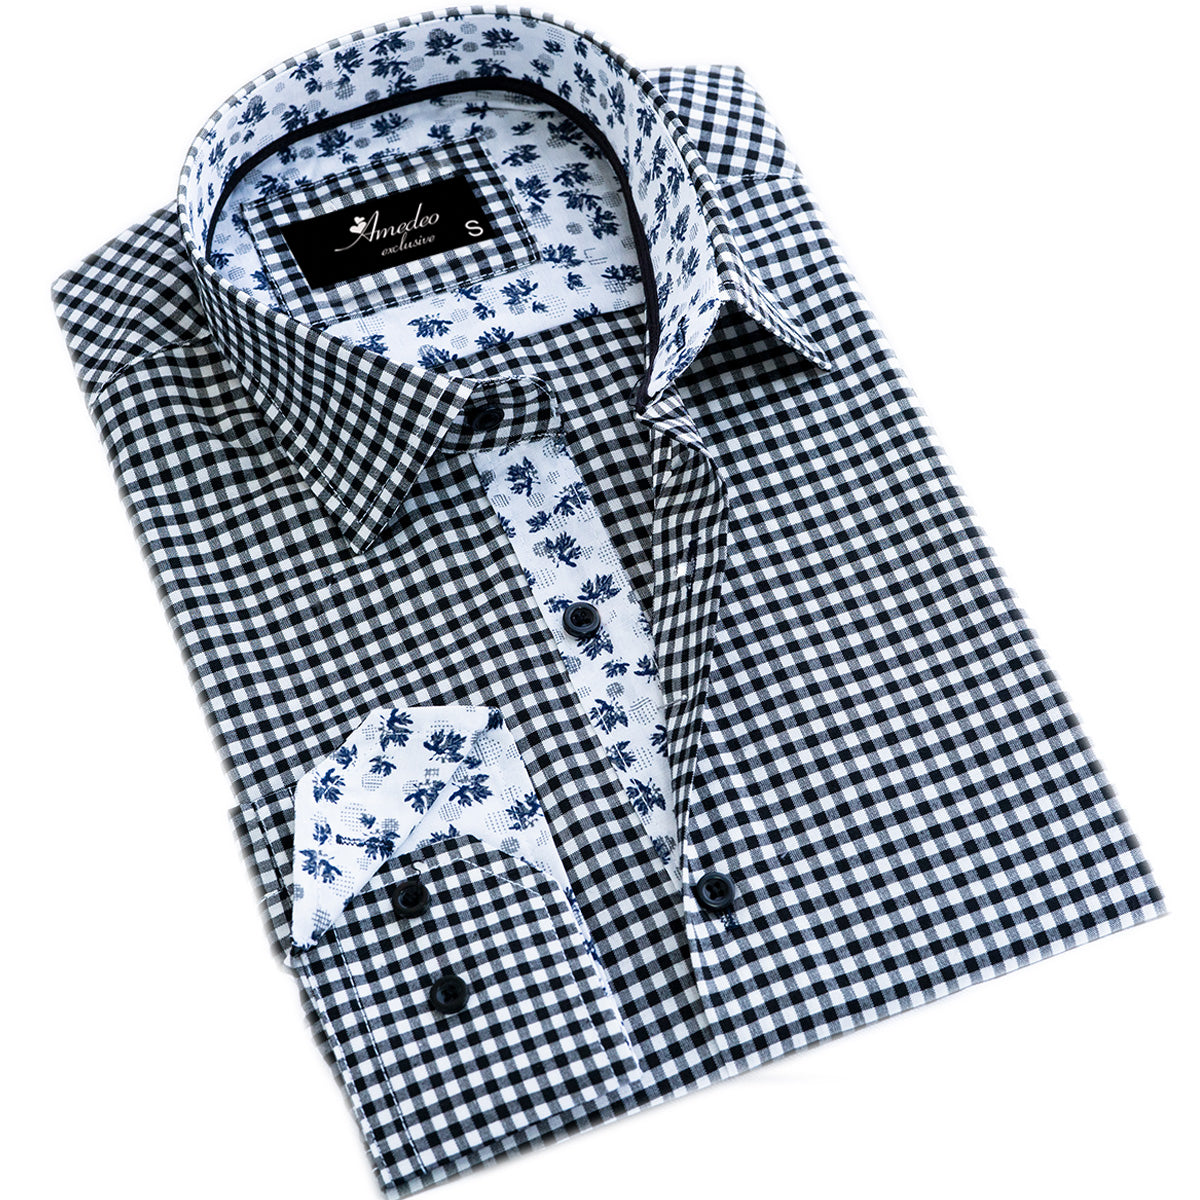 Black White Checkered with Light Blue Floral Mens Slim Fit Designer French Cuff Shirt - tailored Cotton Shirts for Work and Casual Wear